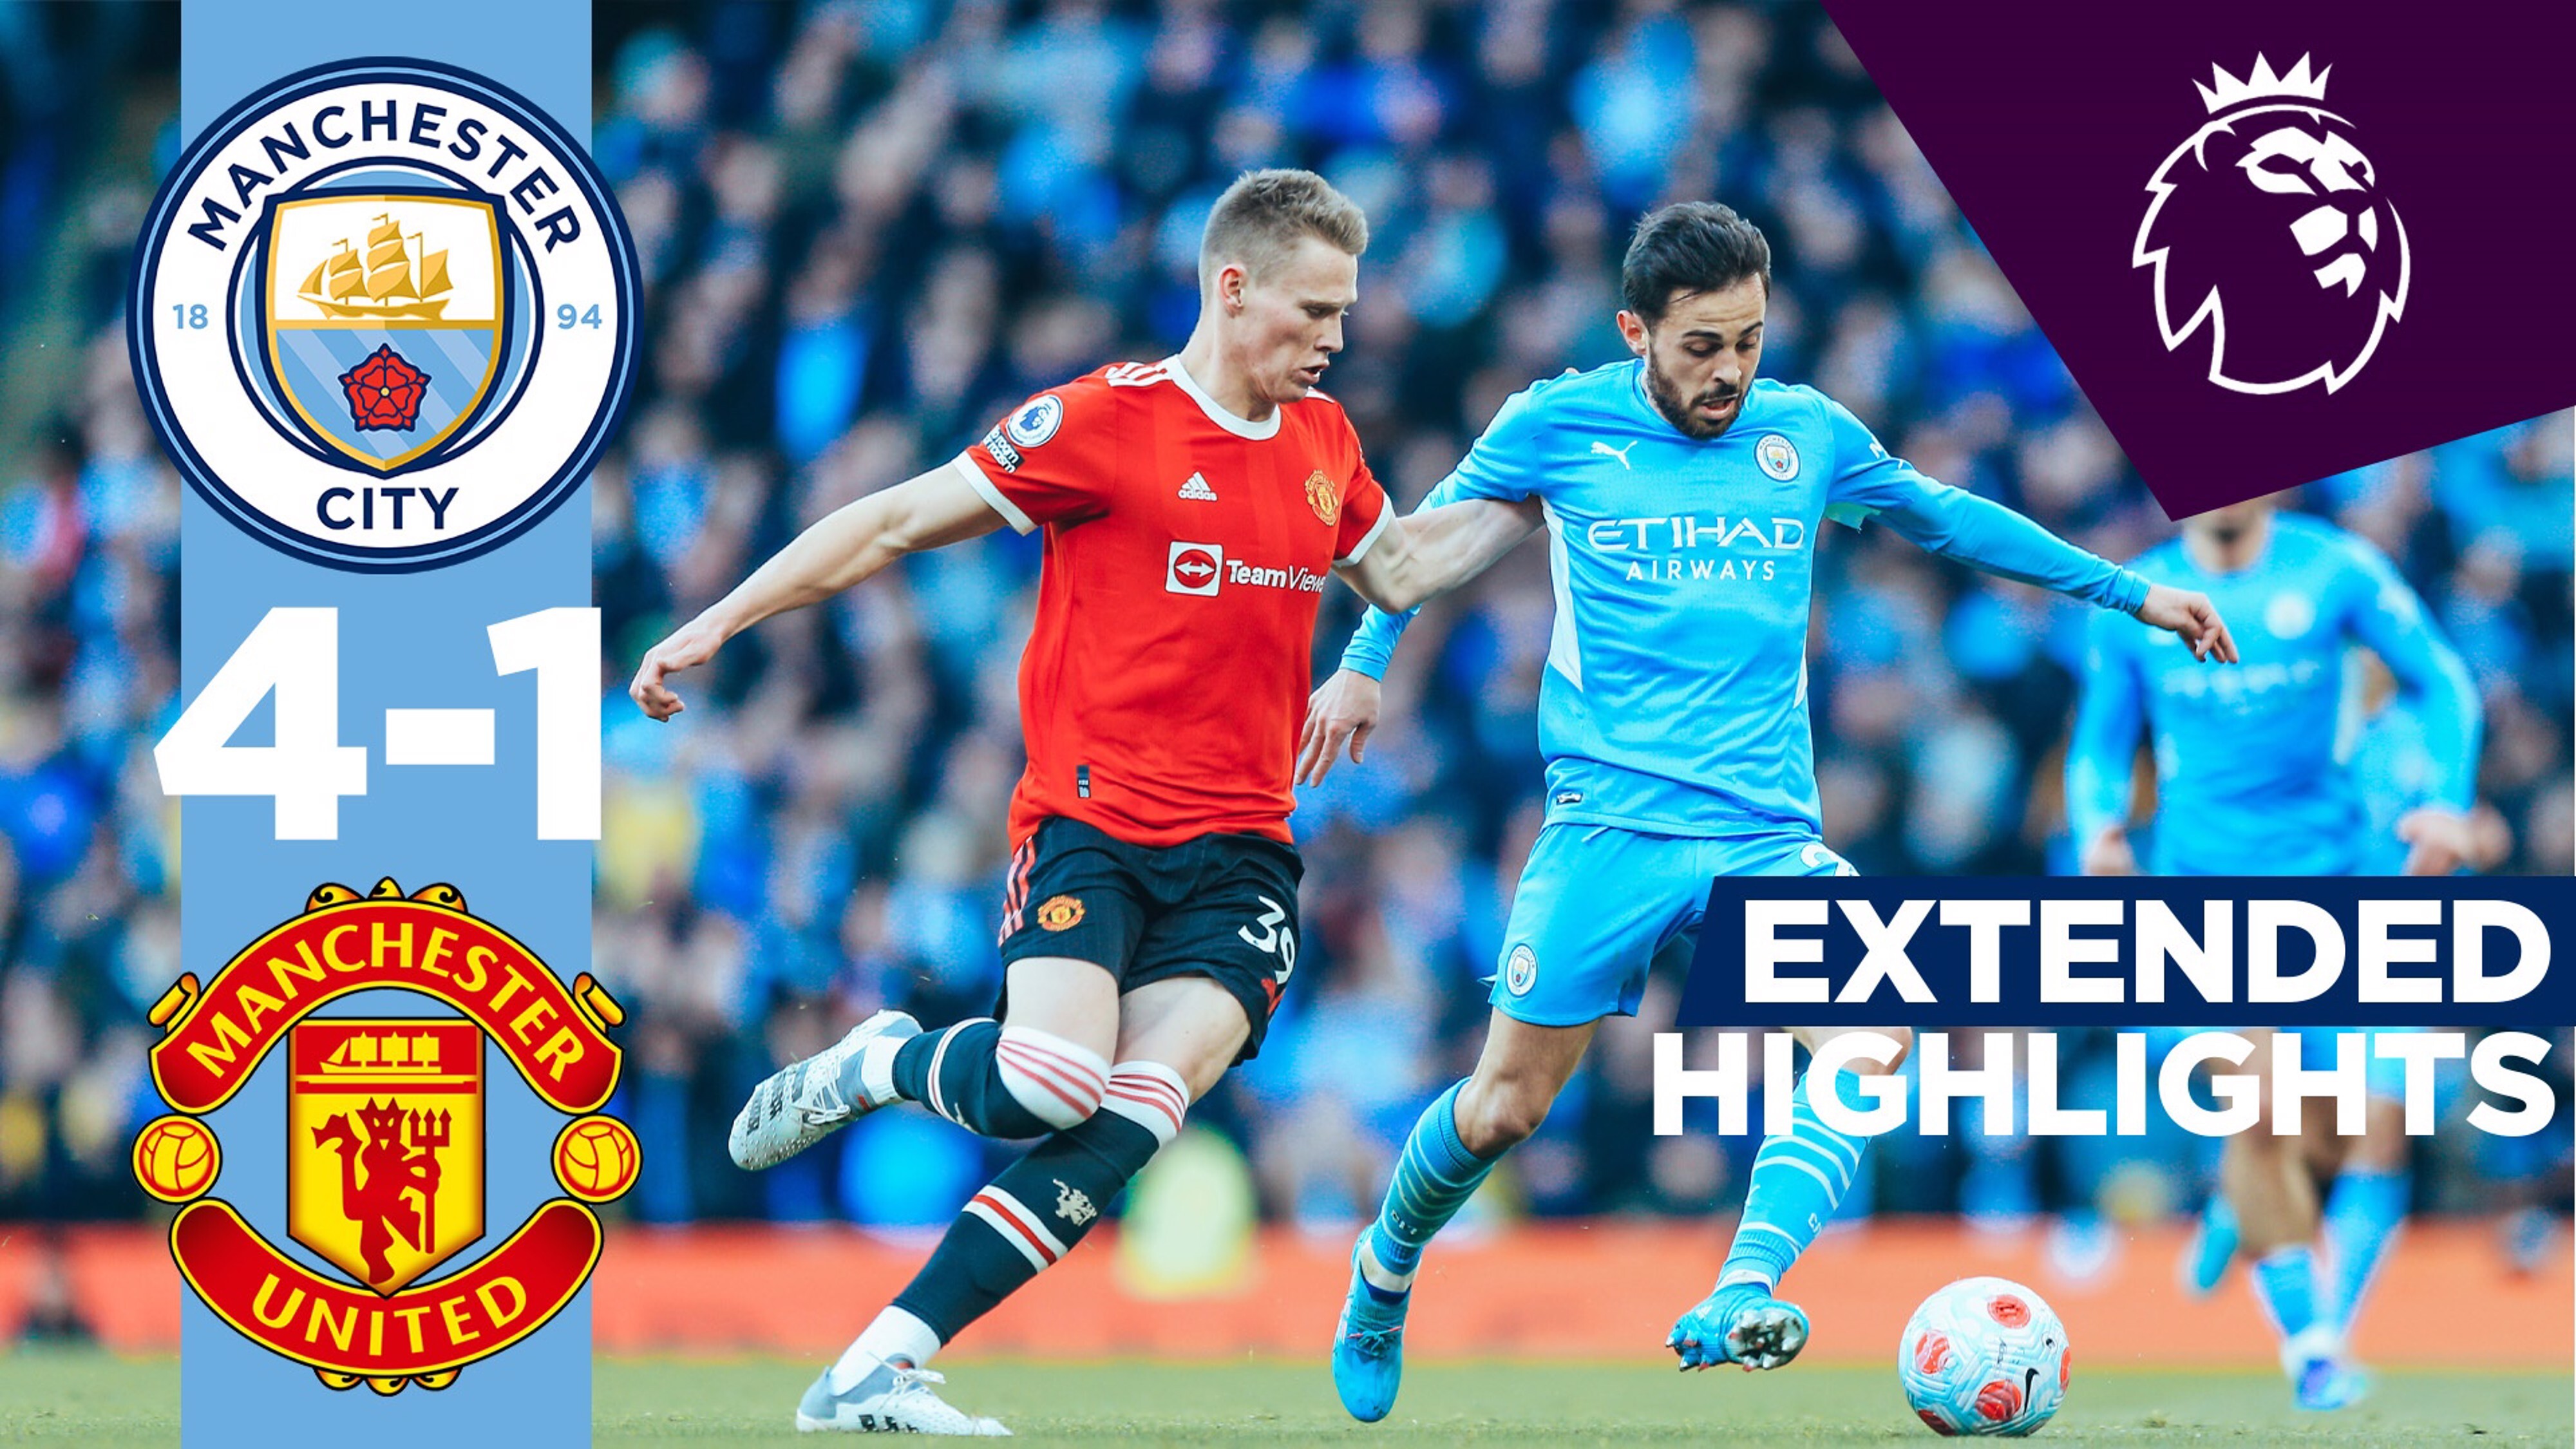 City 4-1 United Extended highlights